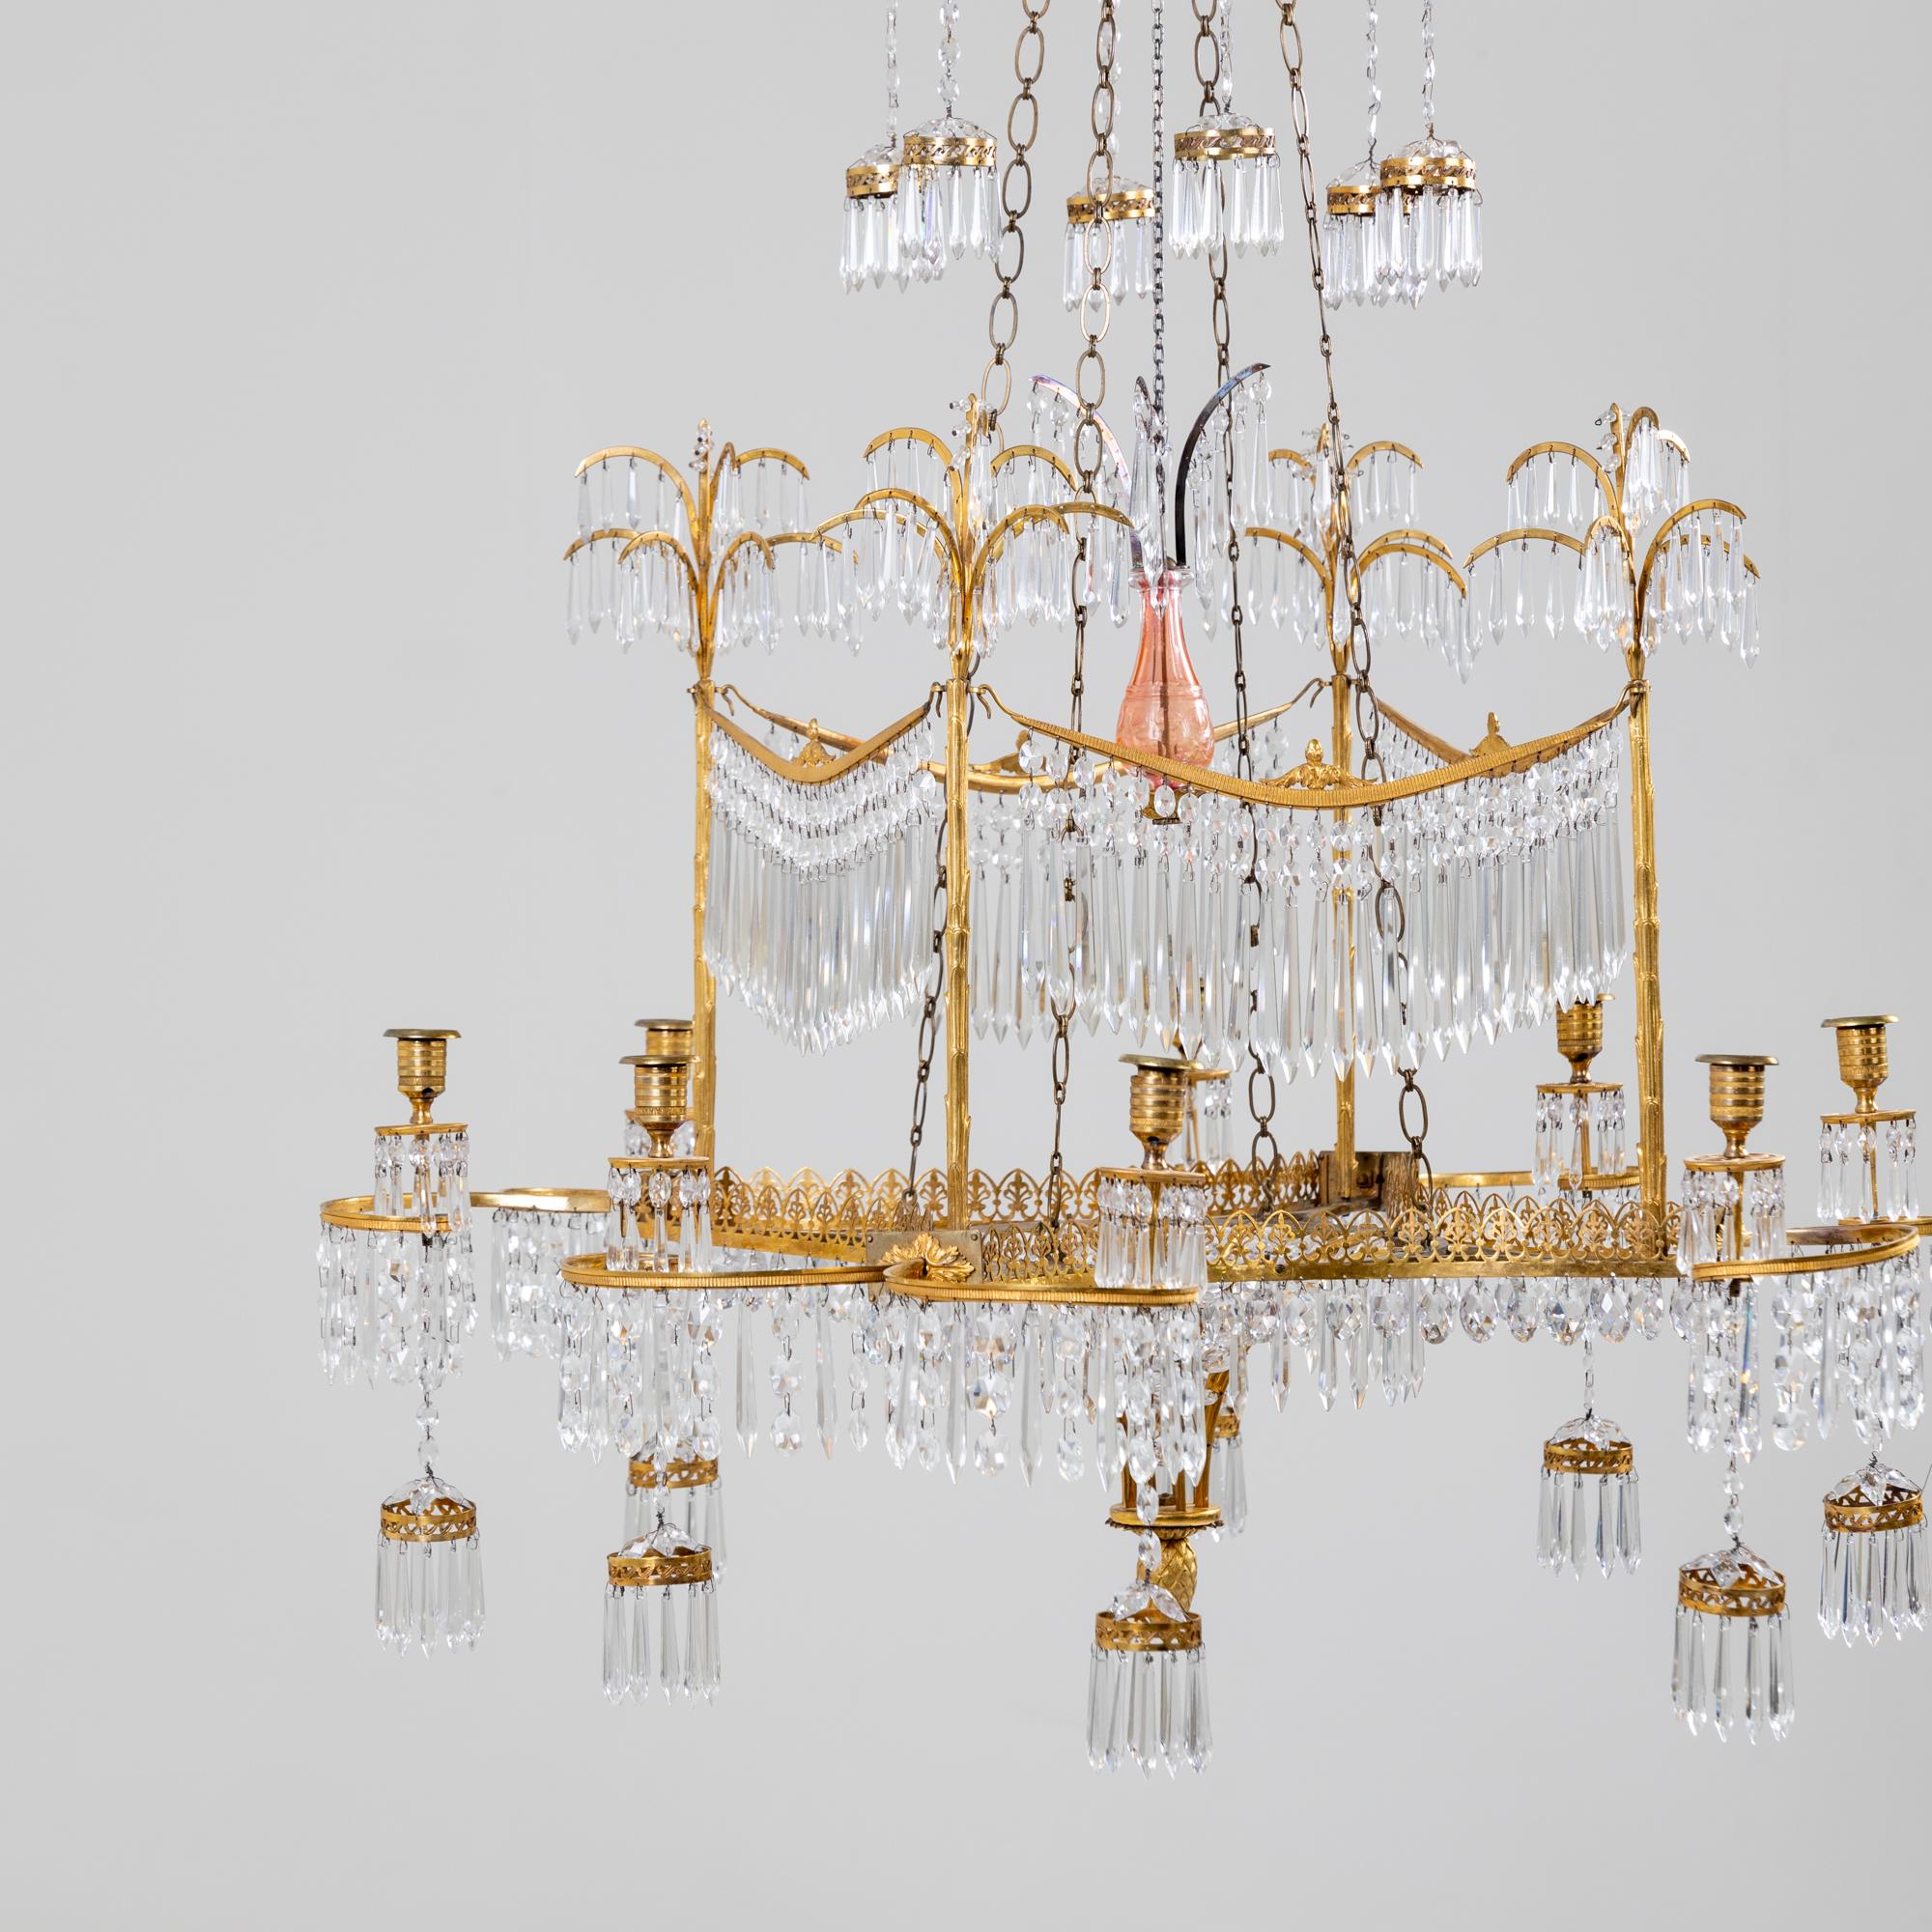 Gilt Chandelier with Palm Trees, Werner & Mieth, Berlin c. 1800-1810 For Sale